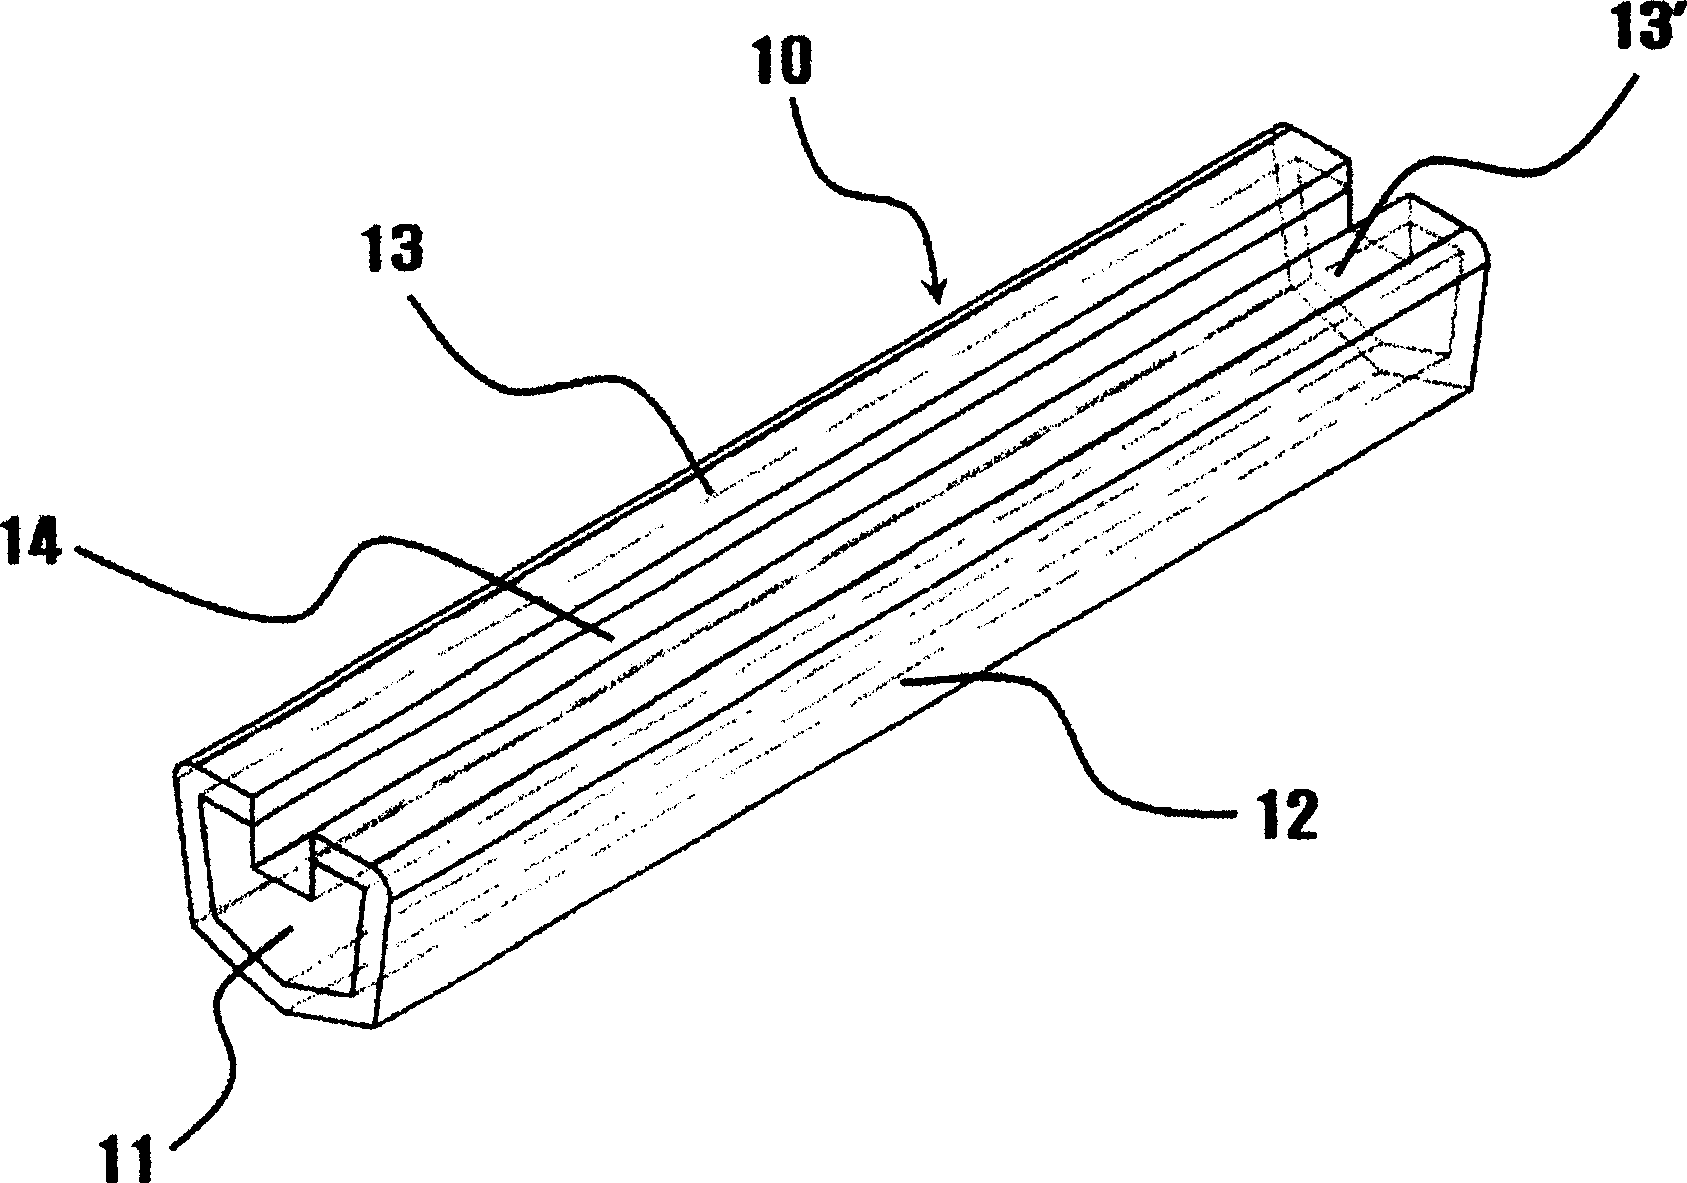 Getter composition and device for introducing of mercury into fluorescence lamp for BLU